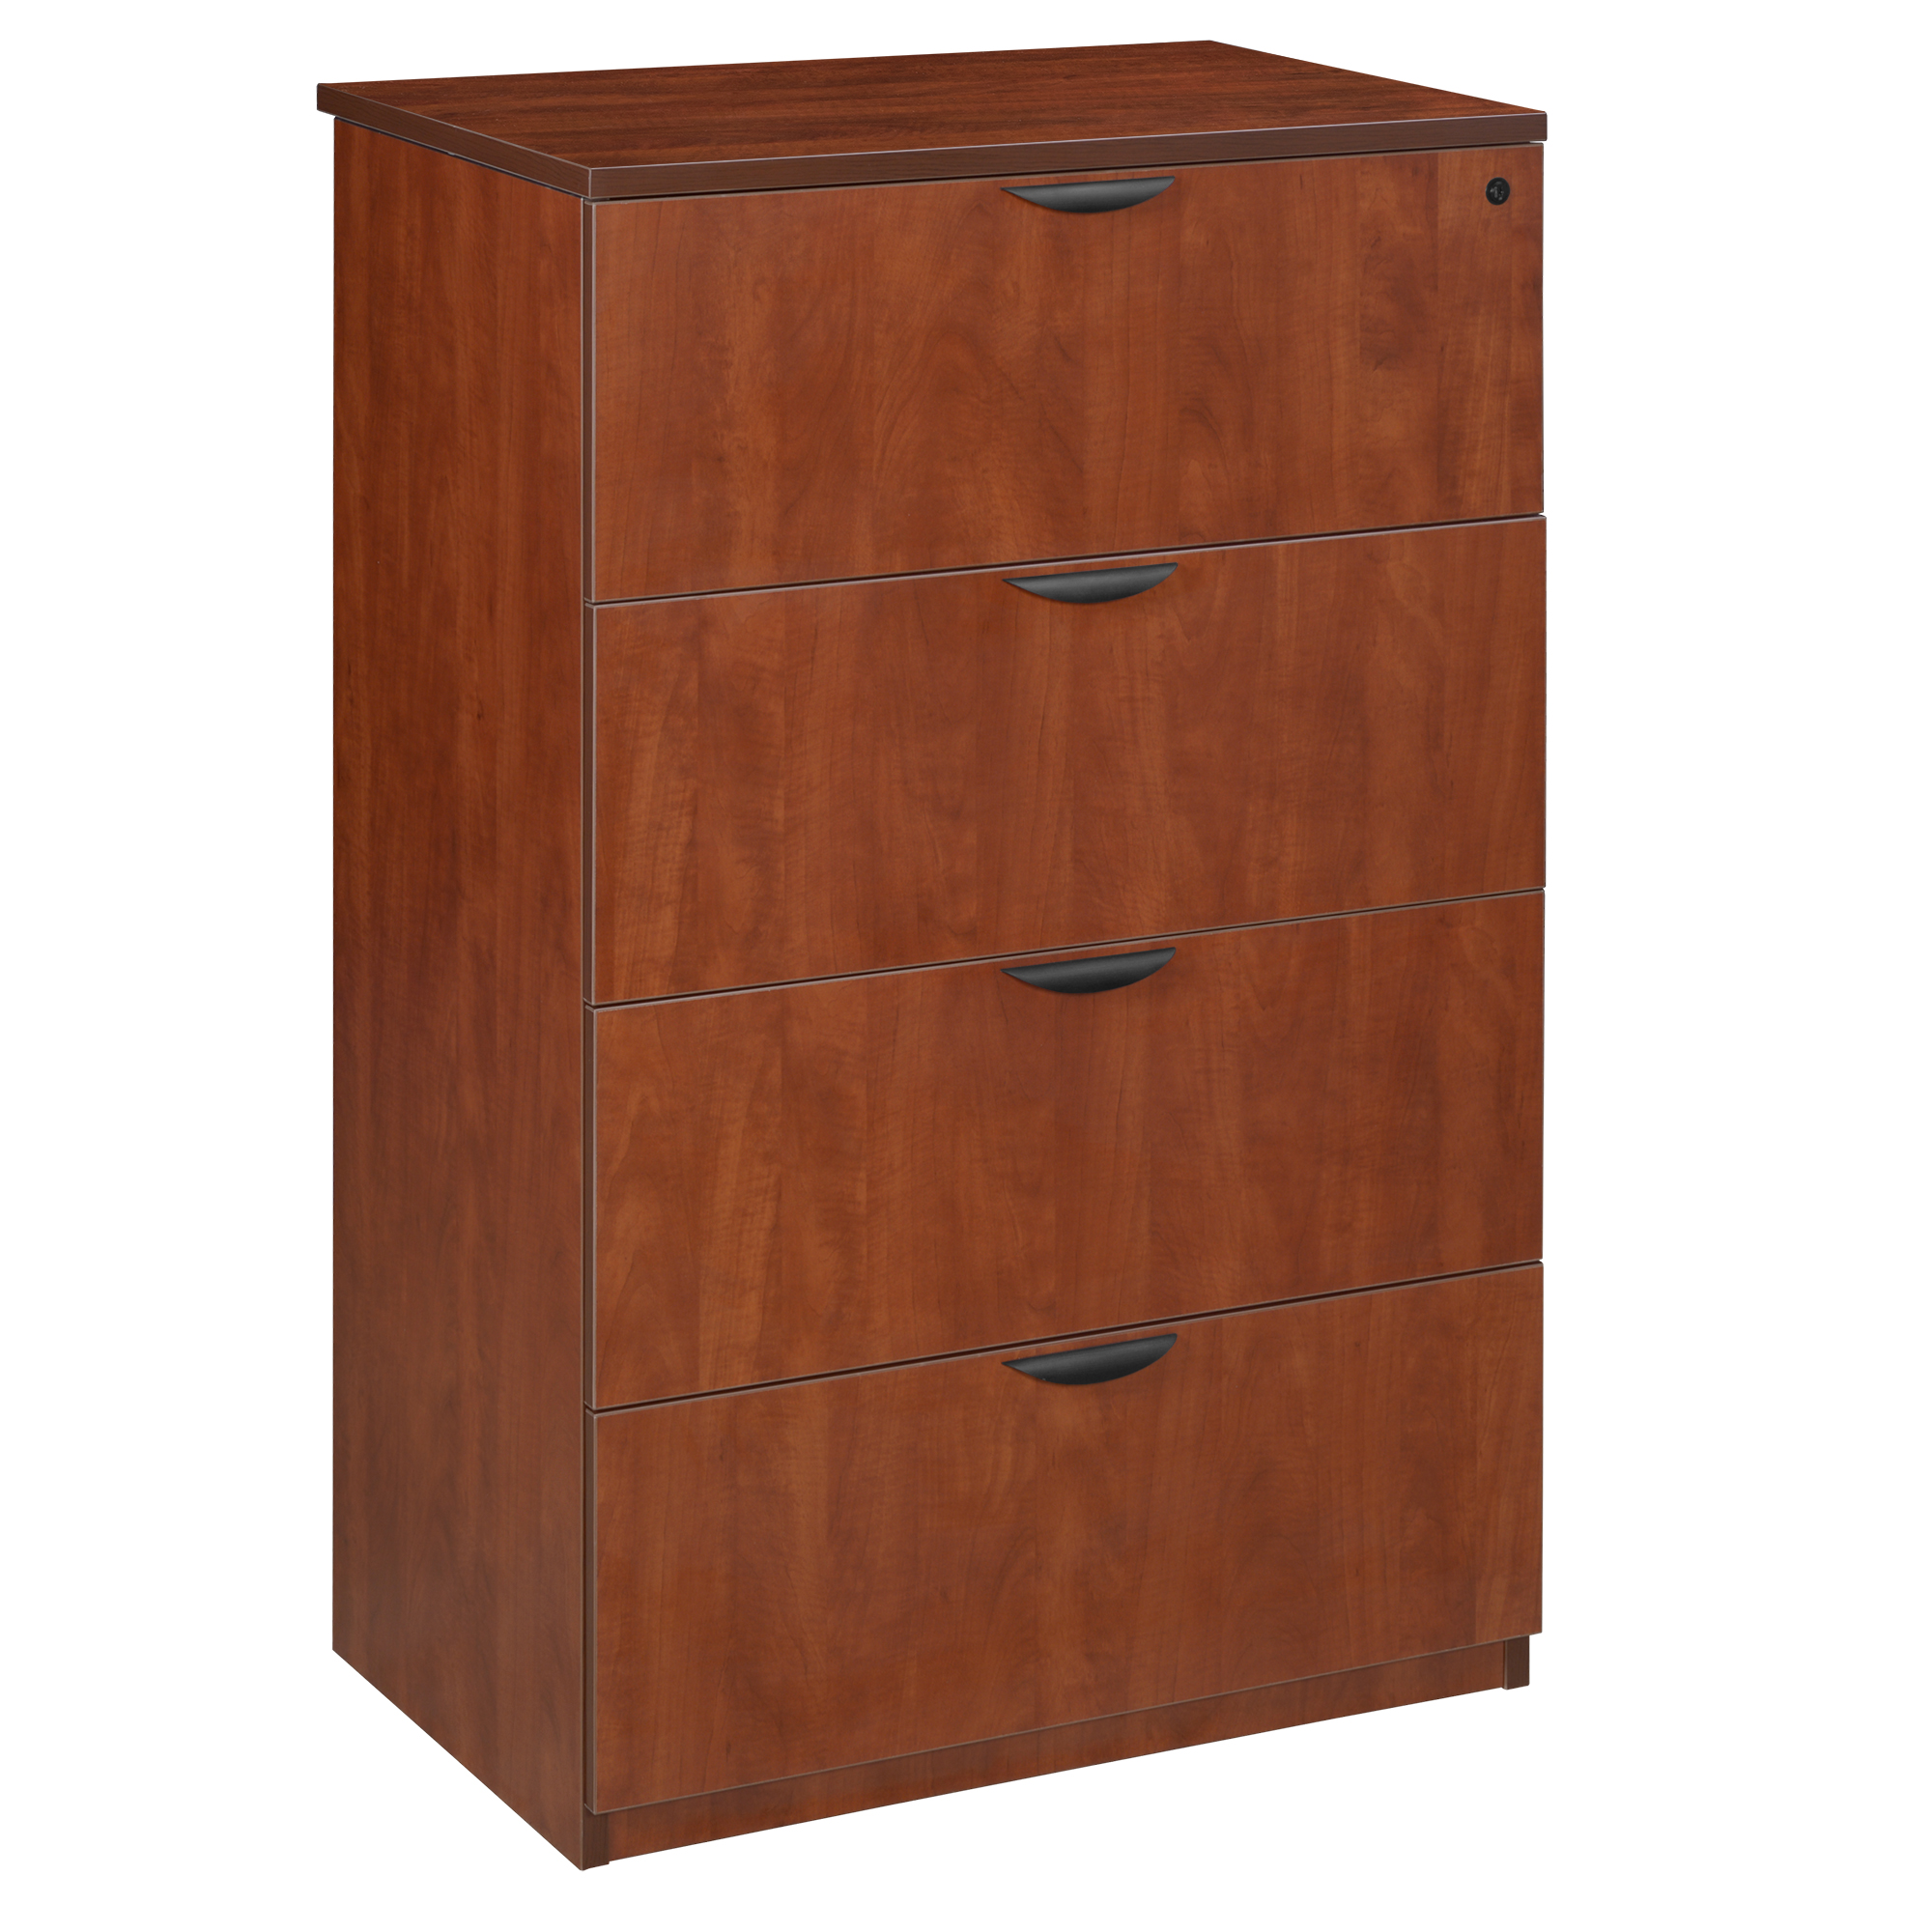 Legacy 4-Drawer Lateral File- Cherry - image 1 of 8